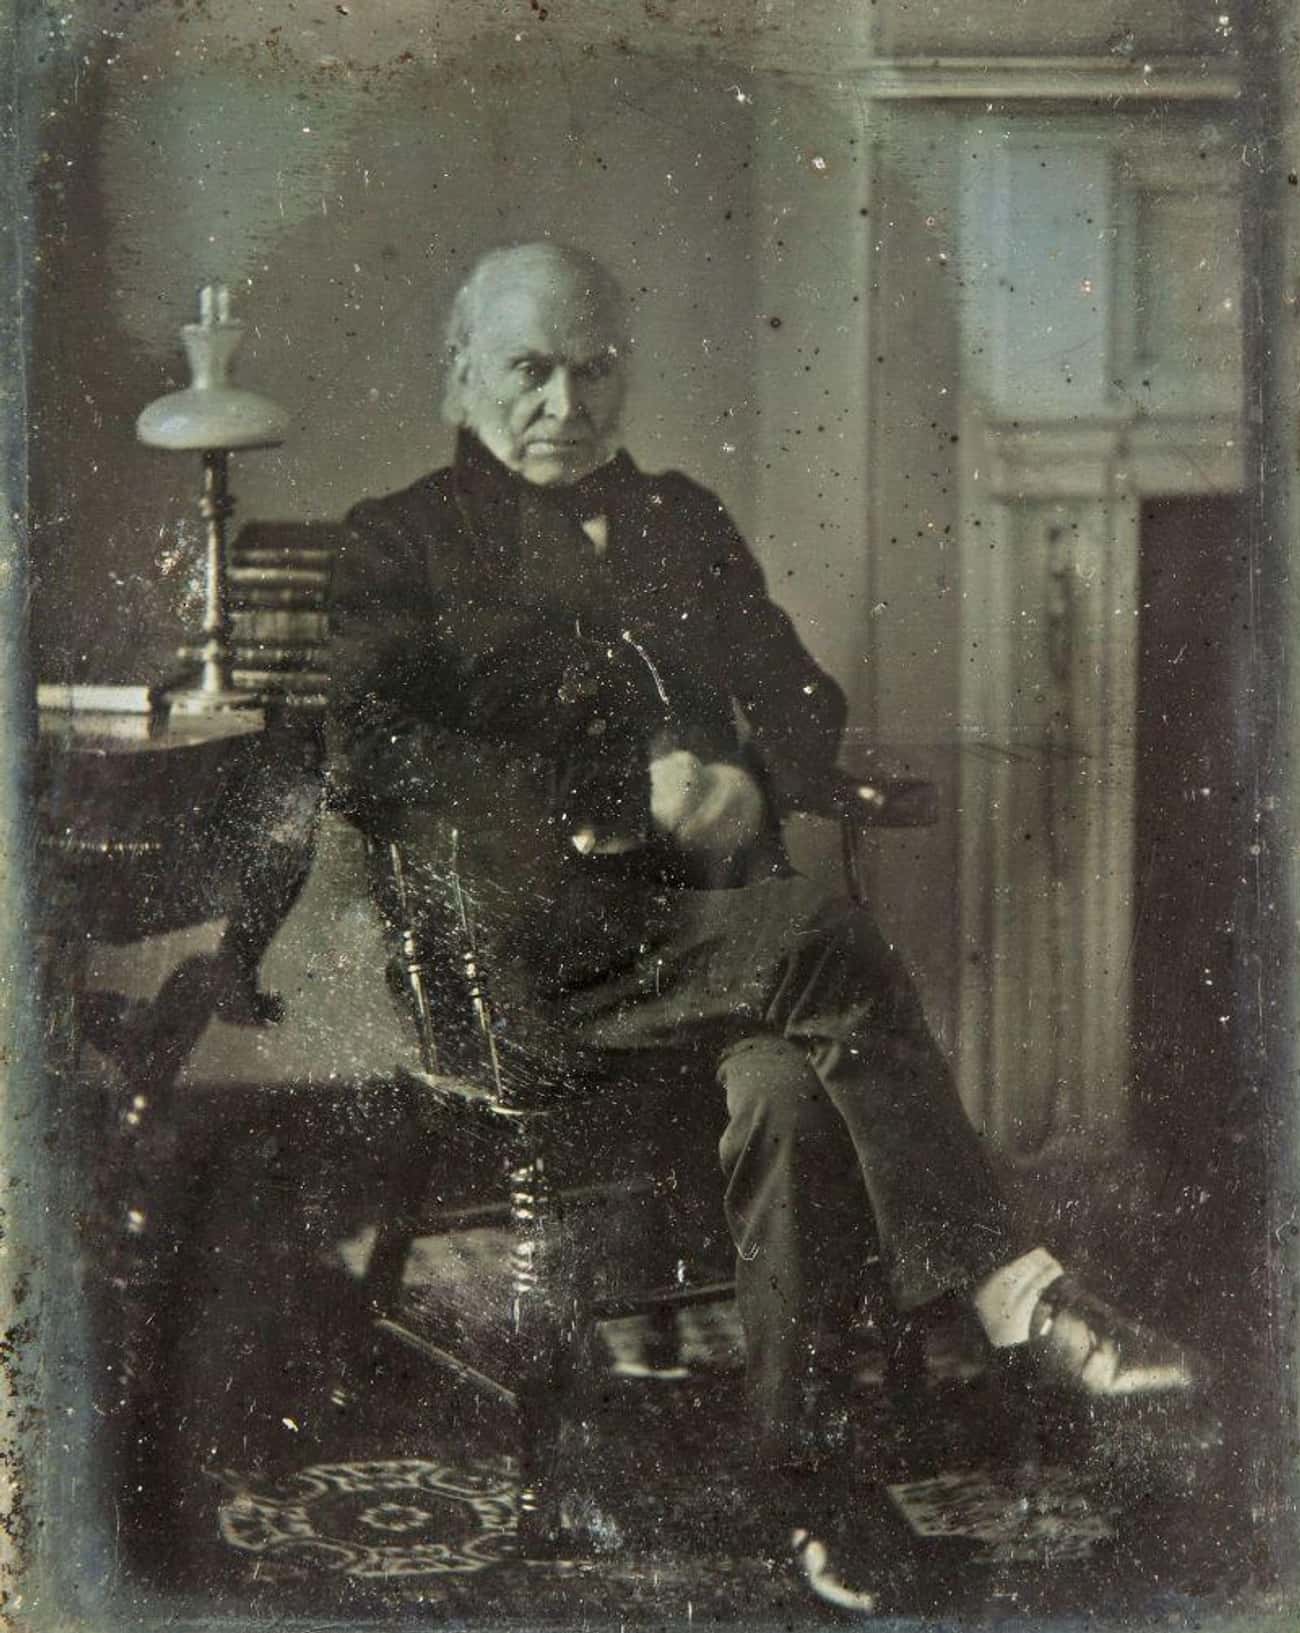 The First Photo Of A United States President, John Quincy Adams; 1843